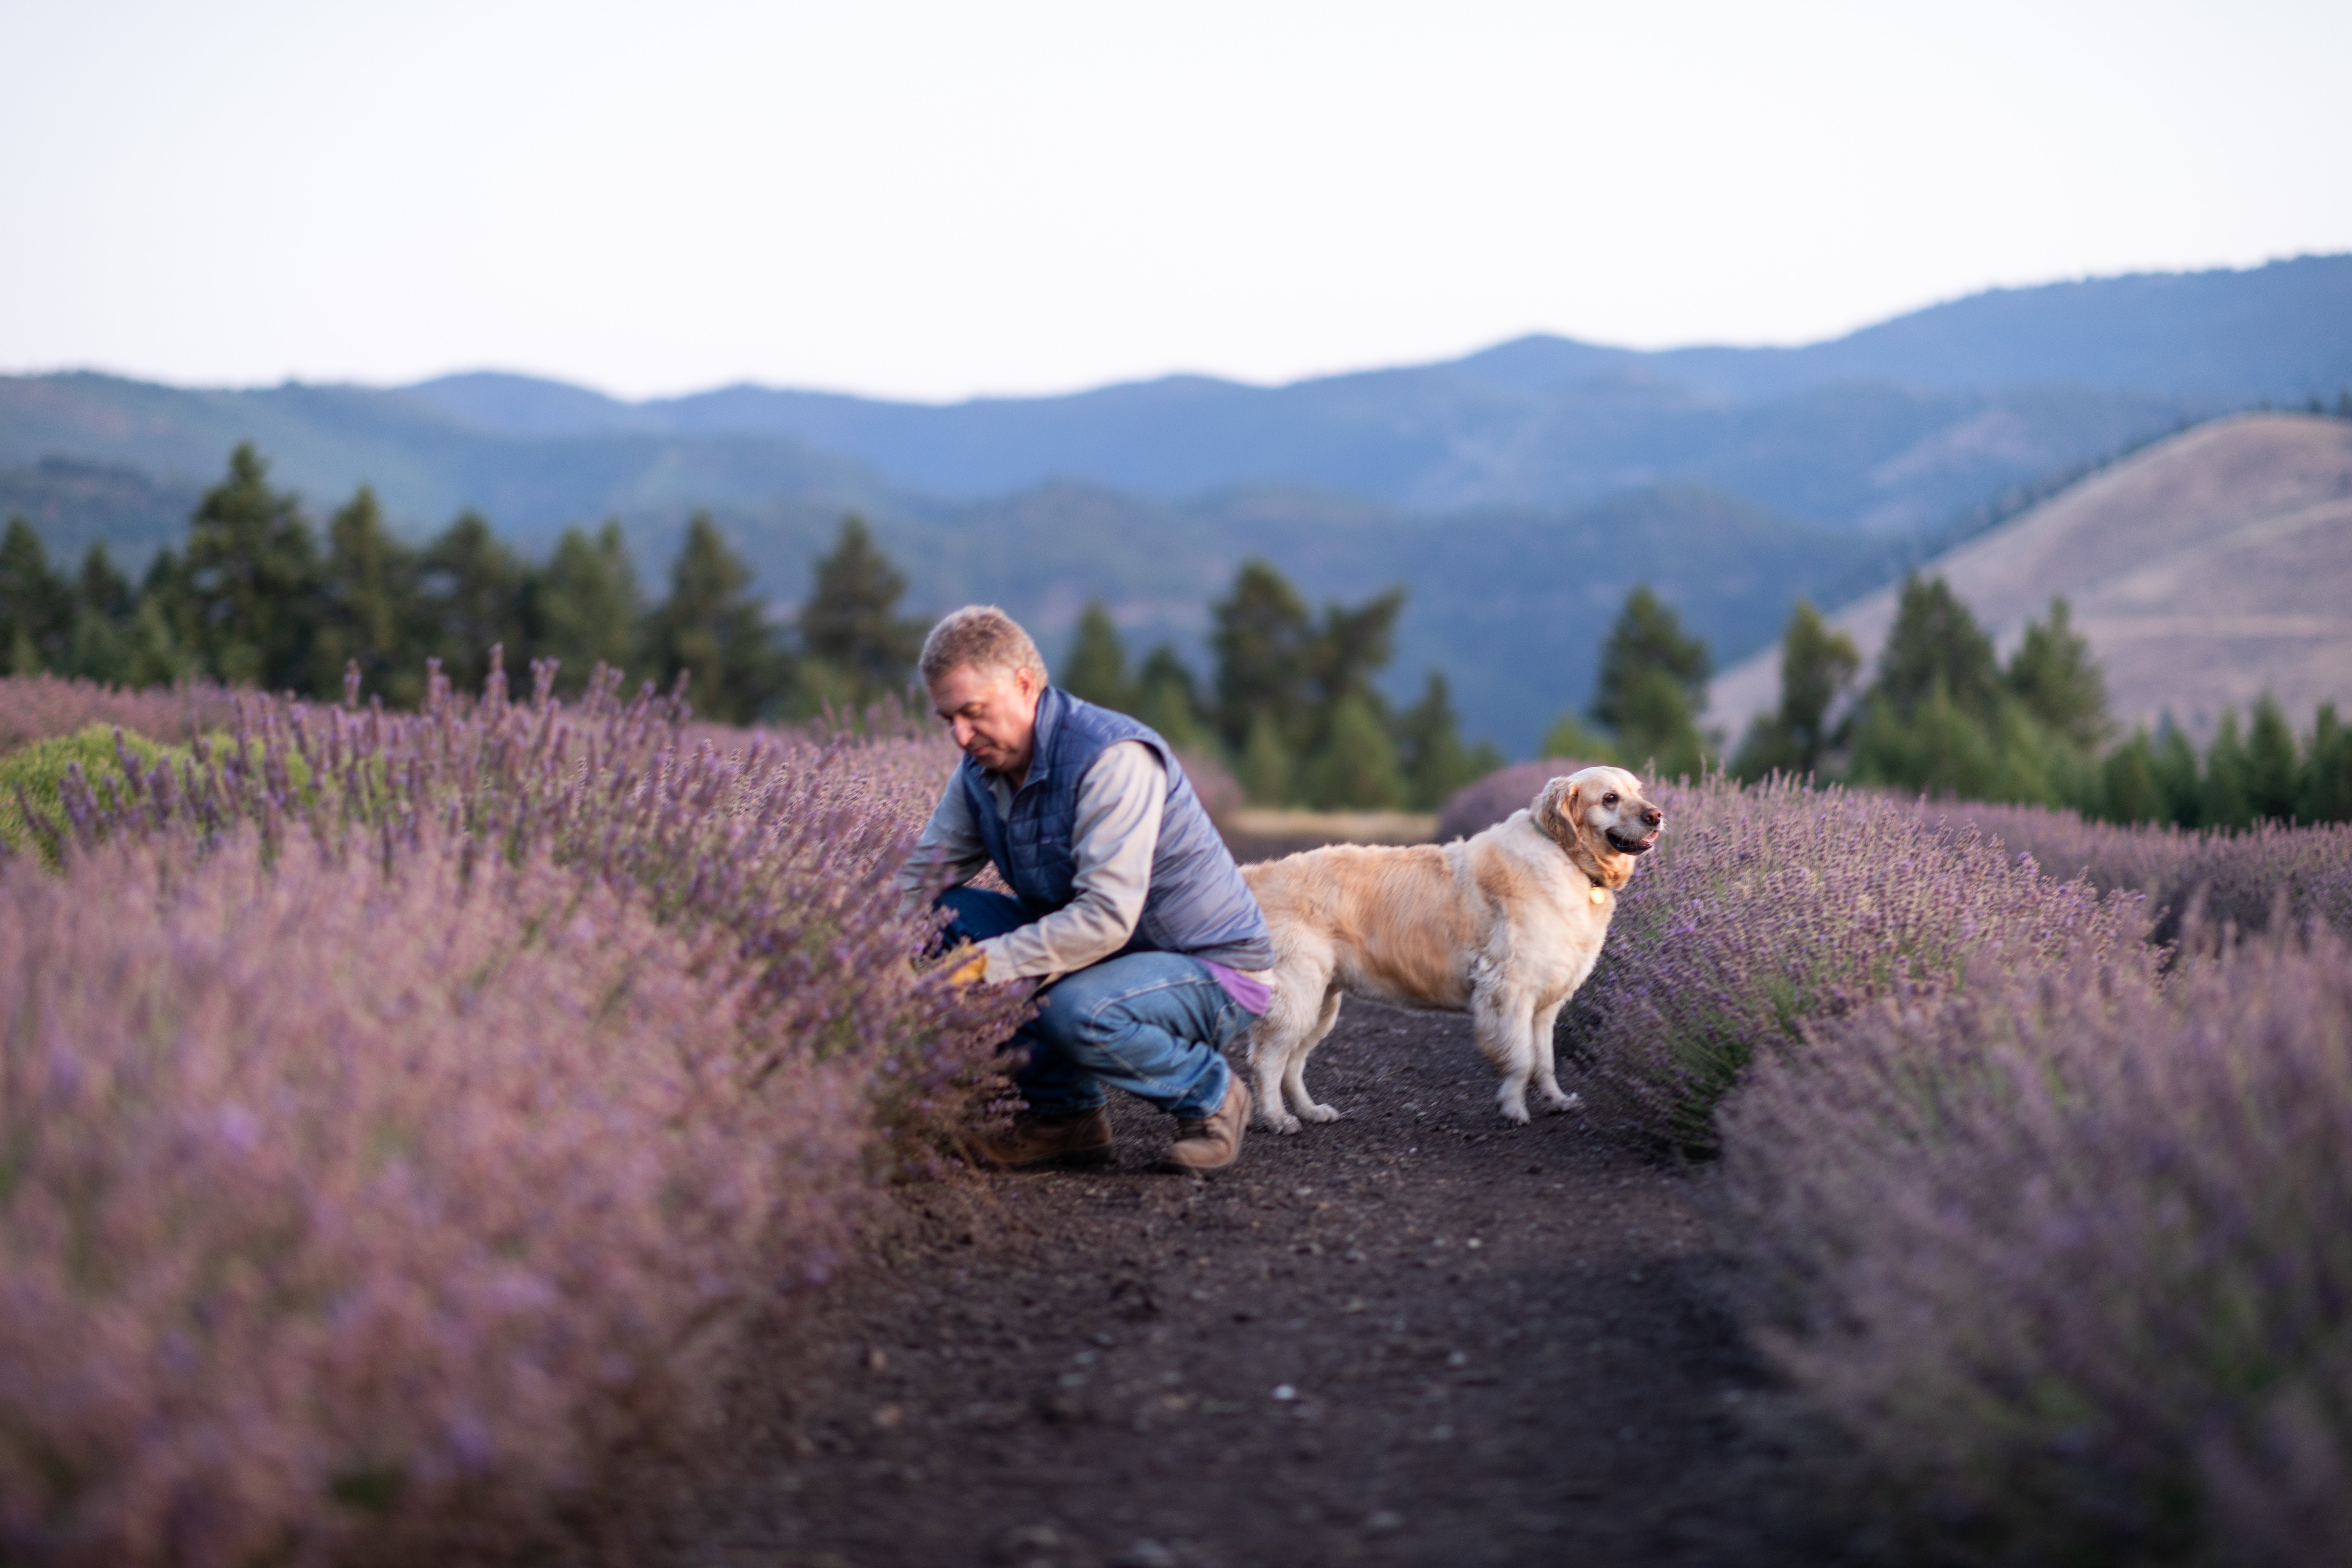 Distiller and his dog in a lavender field